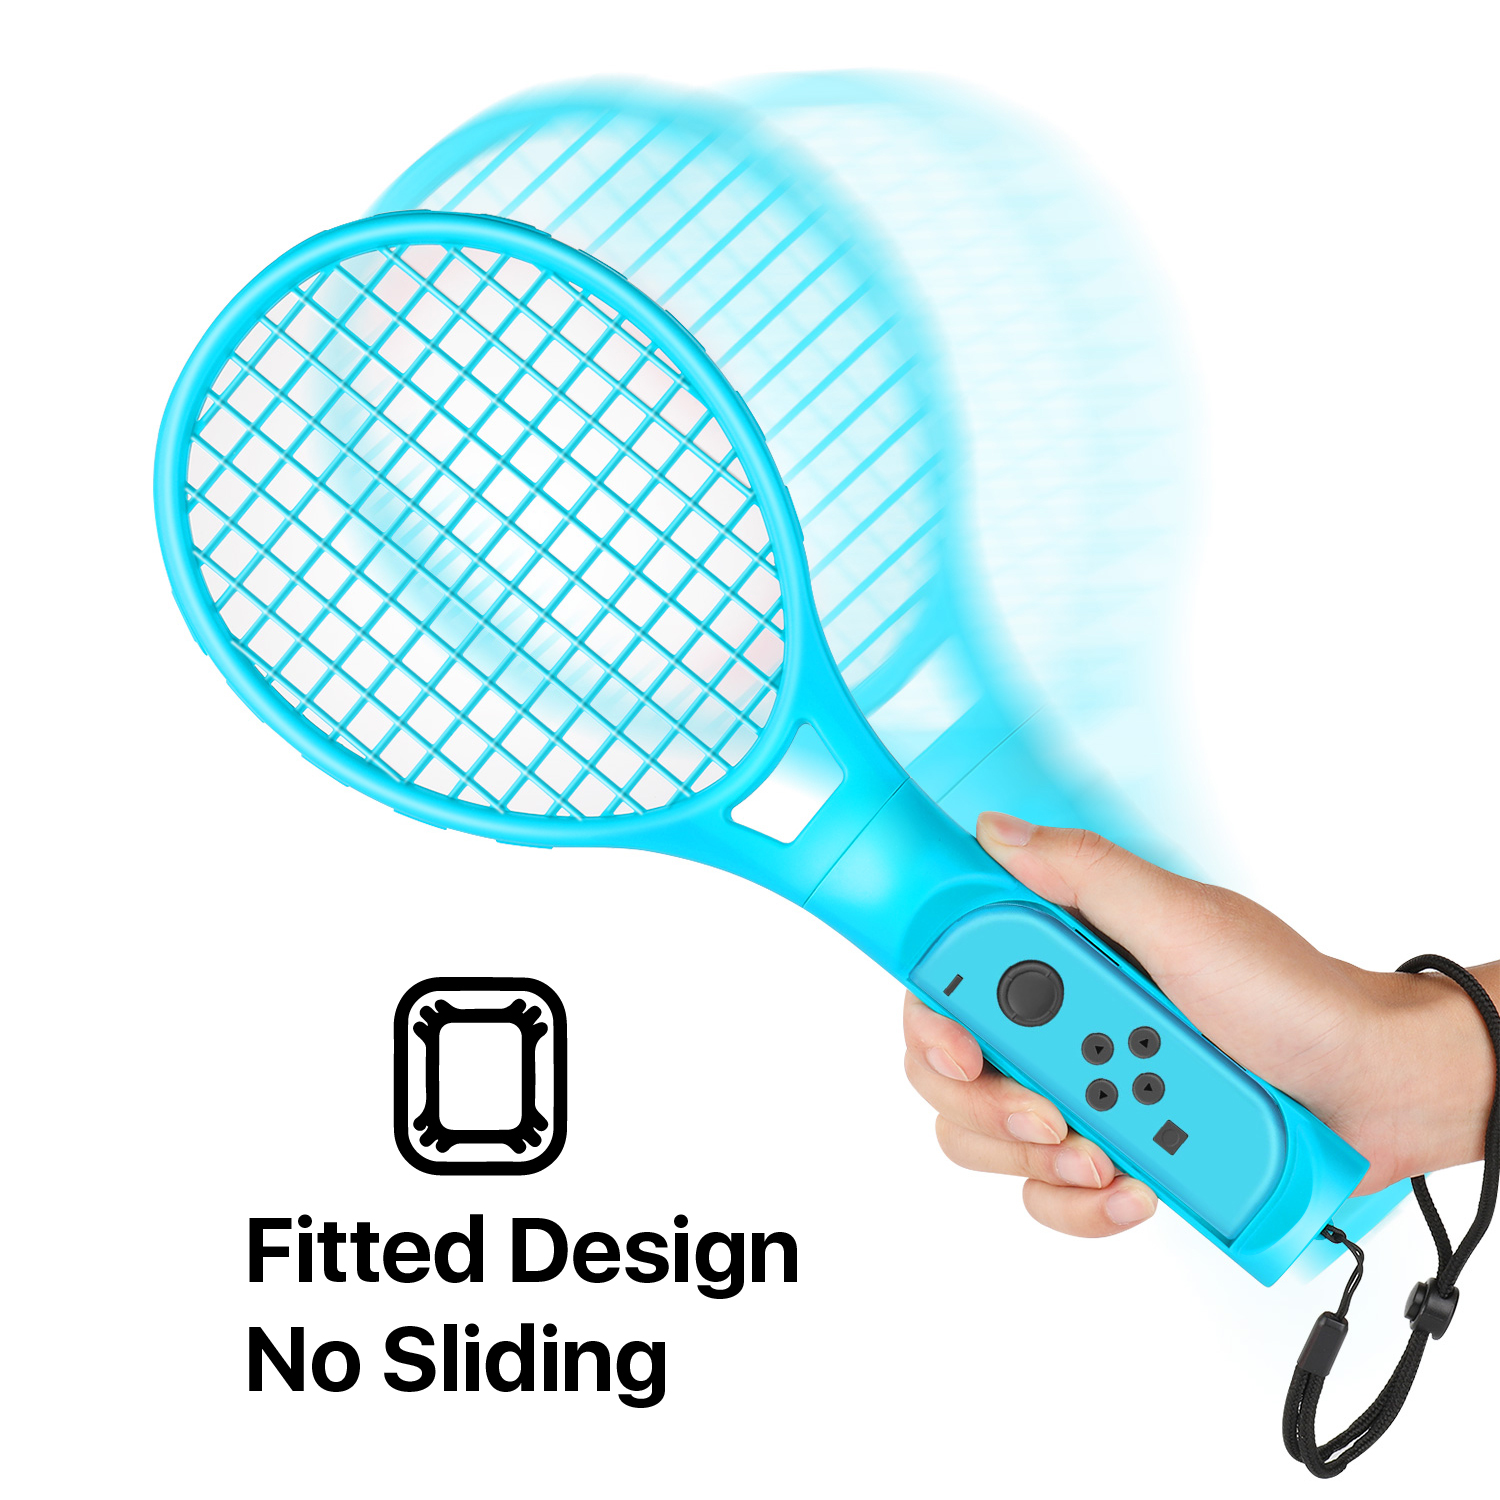 Tennis Racket for Nintendo Switch Joy-Con Controller with Wrist Strap, Joy-Con Racket Accessories Twin Pack for Nintendo Switch Game Mario Tennis Aces Blue and Red